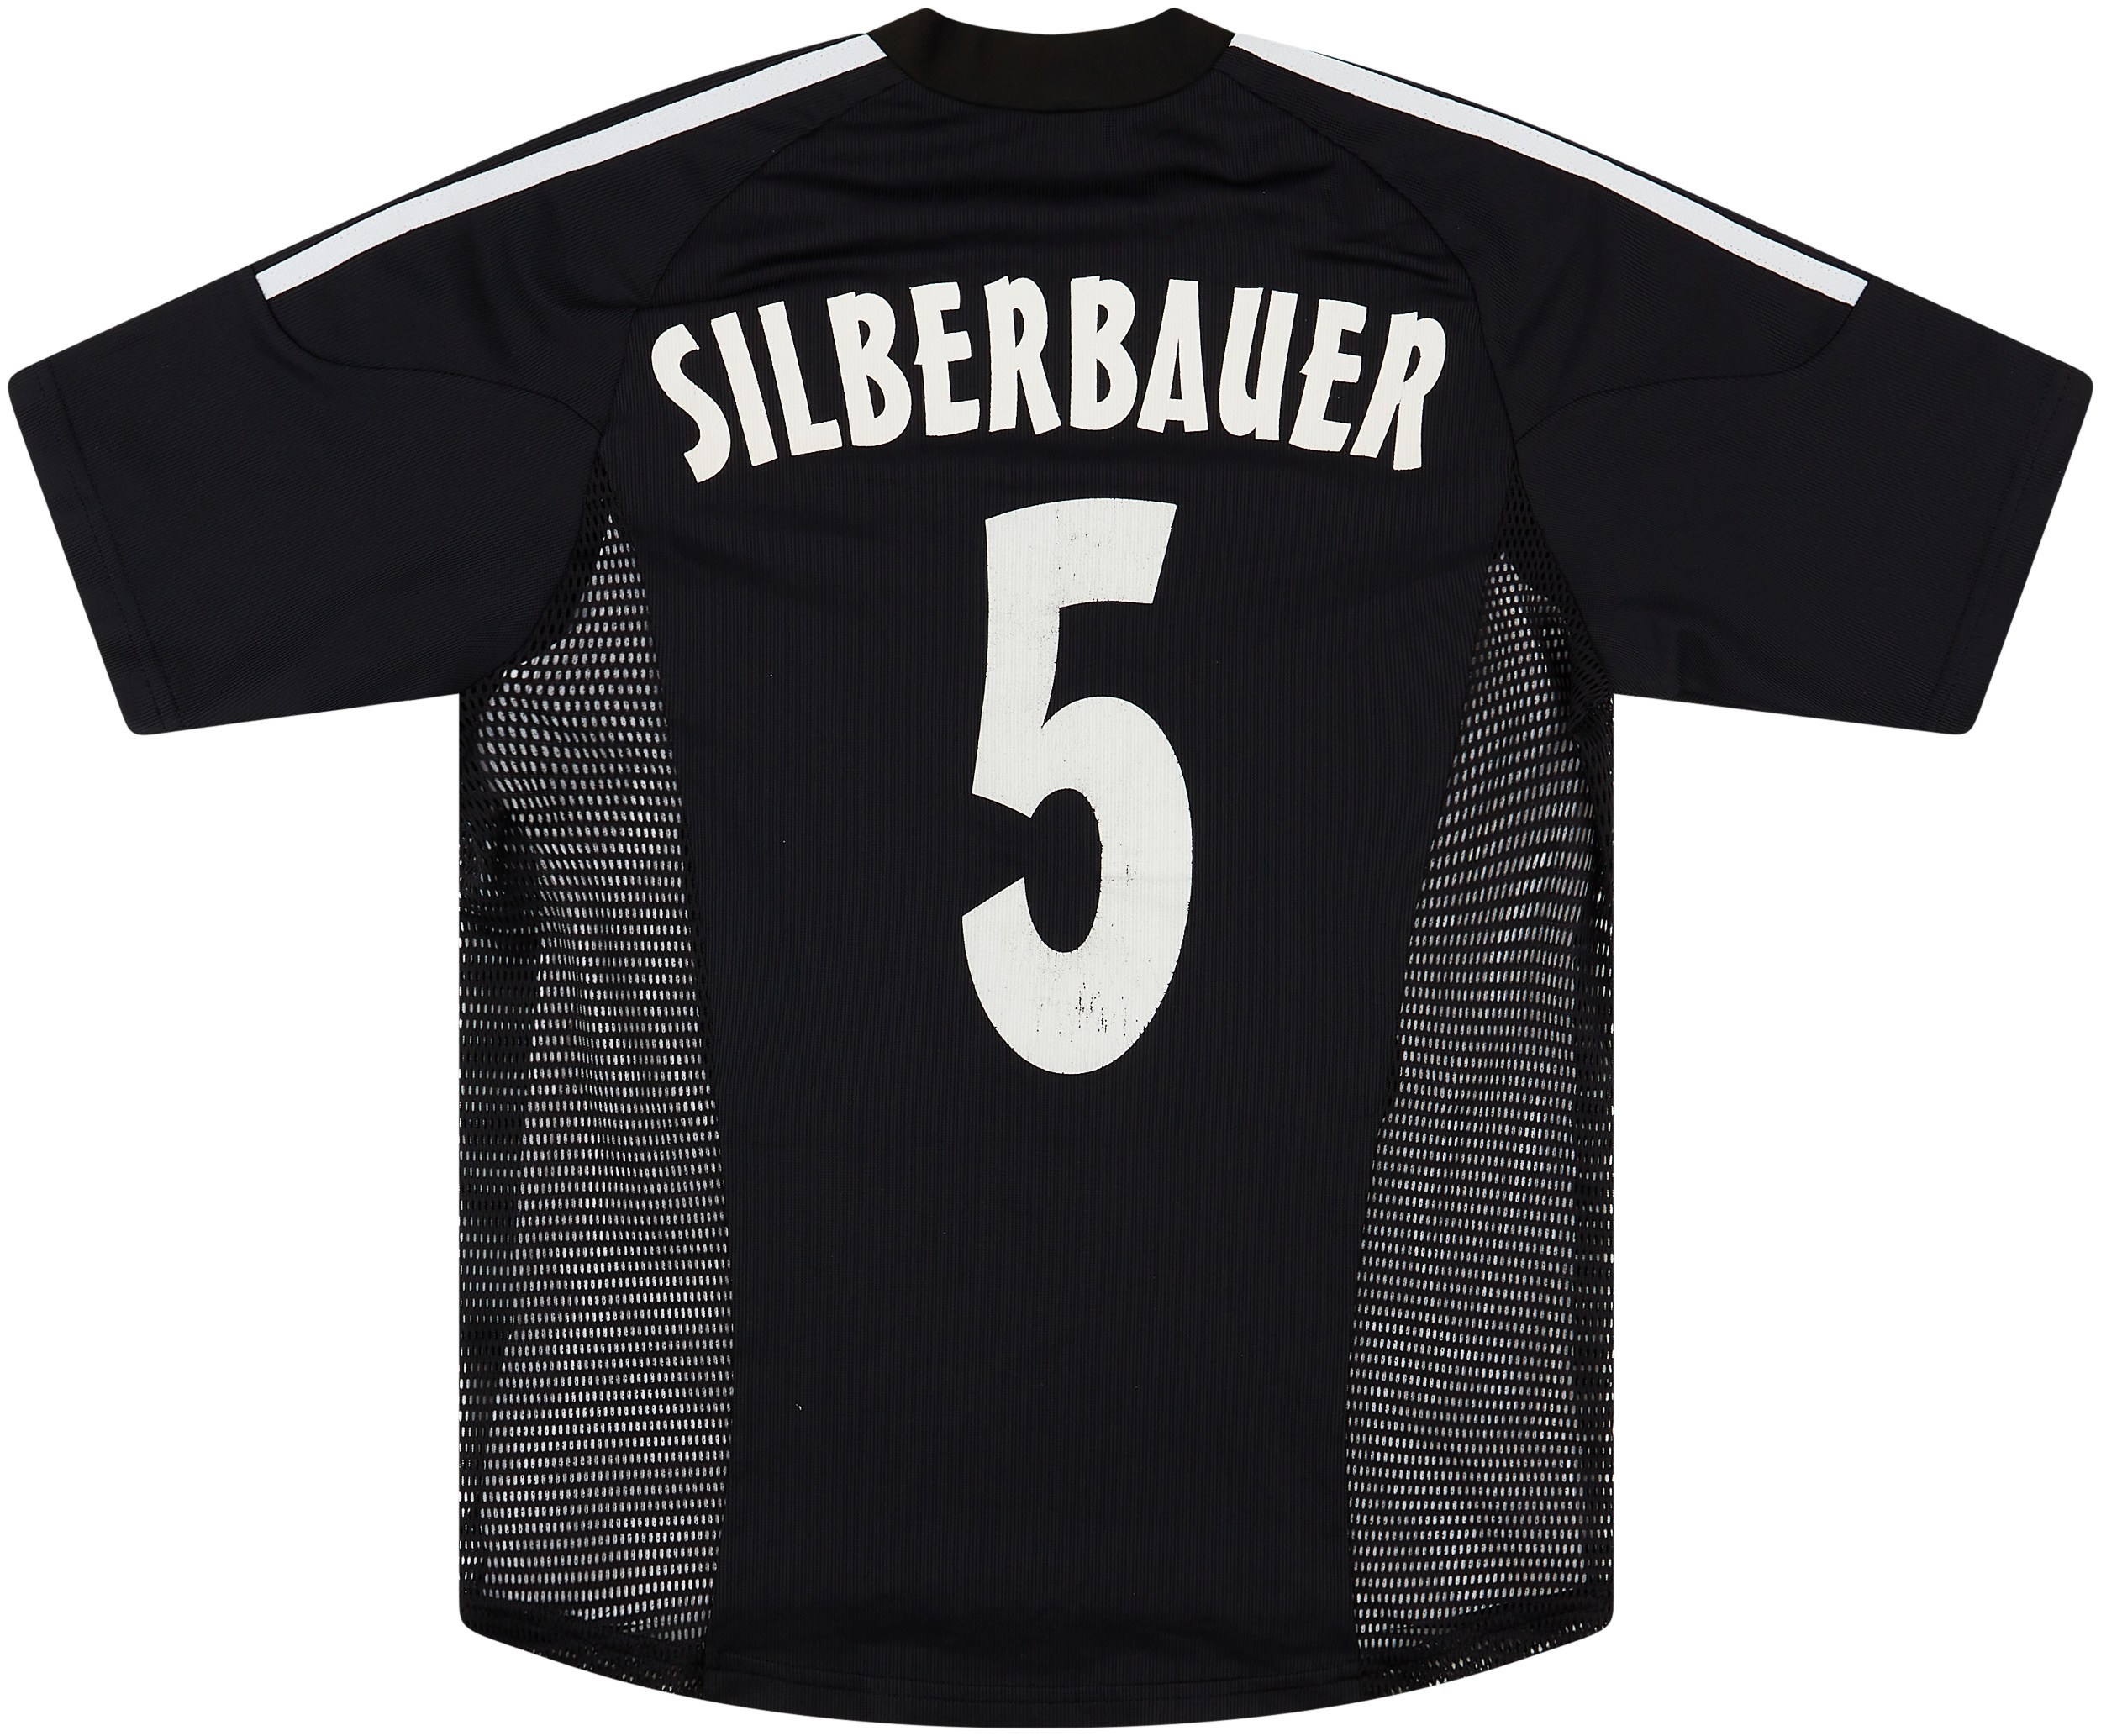 2002-03 Aalborg Player Issue Away Shirt Silberbauer #5 - 5/10 - ()